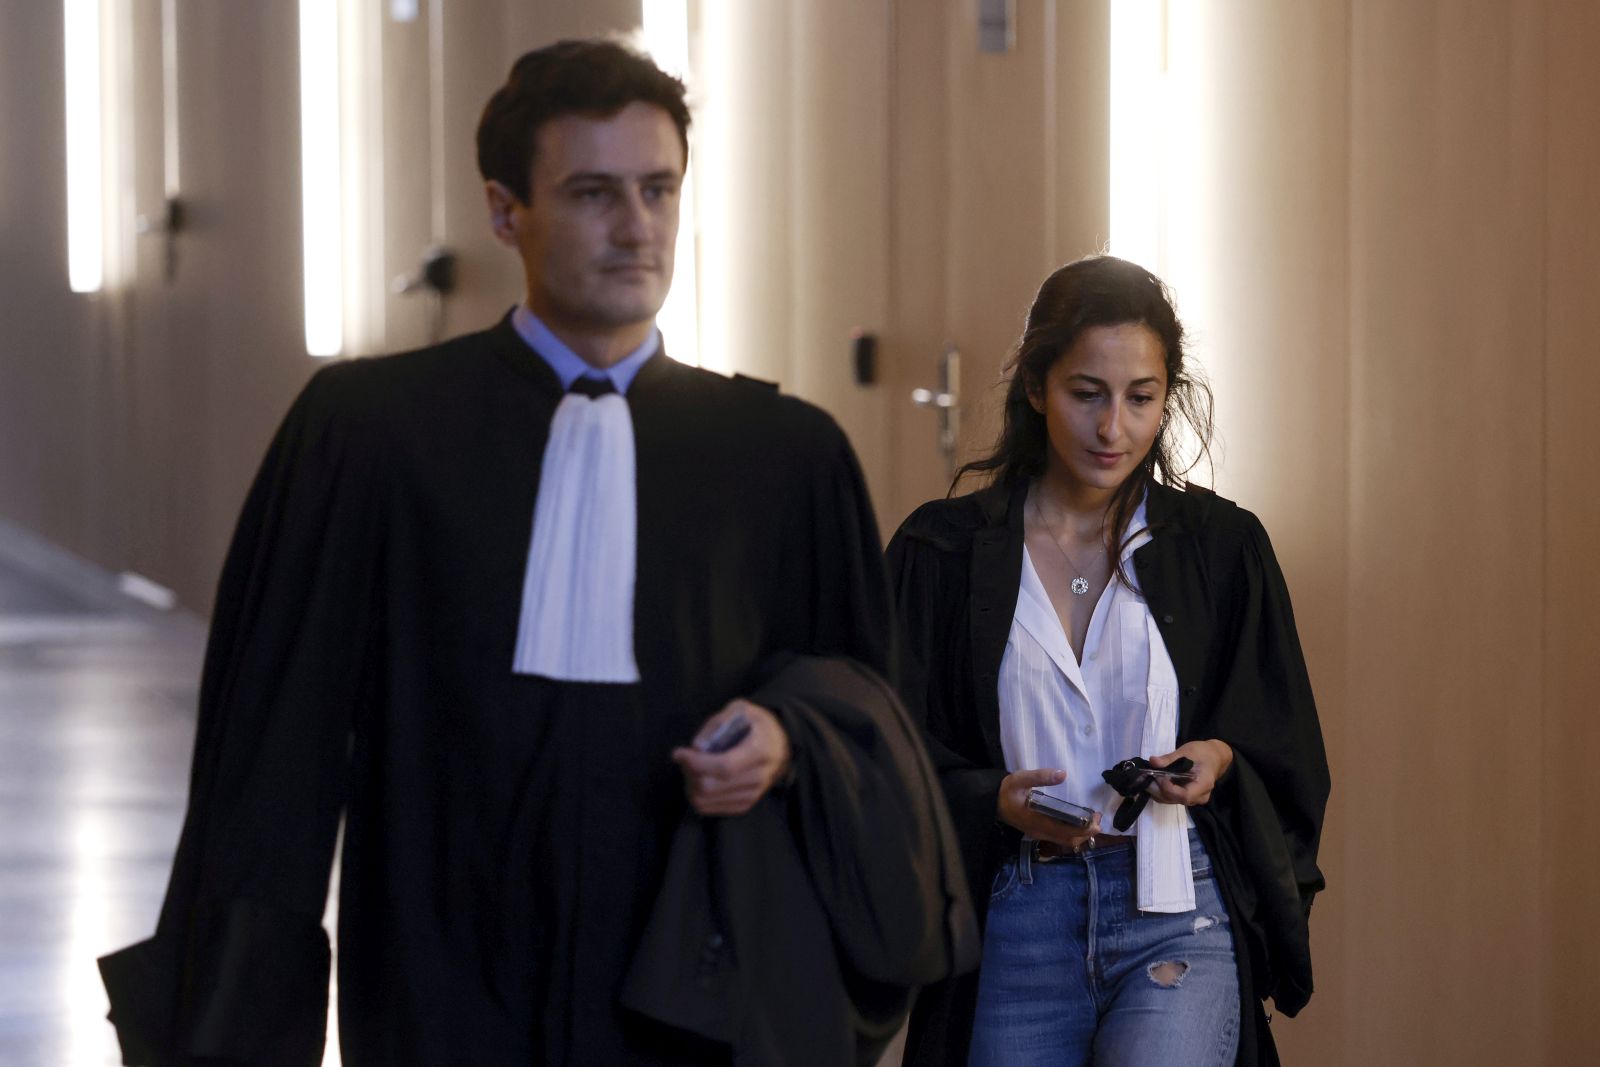 epa10031750 (L-R) Martin Vettes and Olivia Ronen, lawyers of Salah Abdeslam, accused of being involved in the 2015 Paris attacks, arrive at the courthouse in Paris, France, 24 June 2022. The trial over the 13 November 2015 terrorist attacks began on 08 September 2021 and it is expected to last nine months. Over 130 people were killed and hundreds injured in a series of coordinated attacks in Paris targeting the Bataclan concert hall, the Stade de France national sports stadium, and several restaurants and bars.  EPA/YOAN VALAT